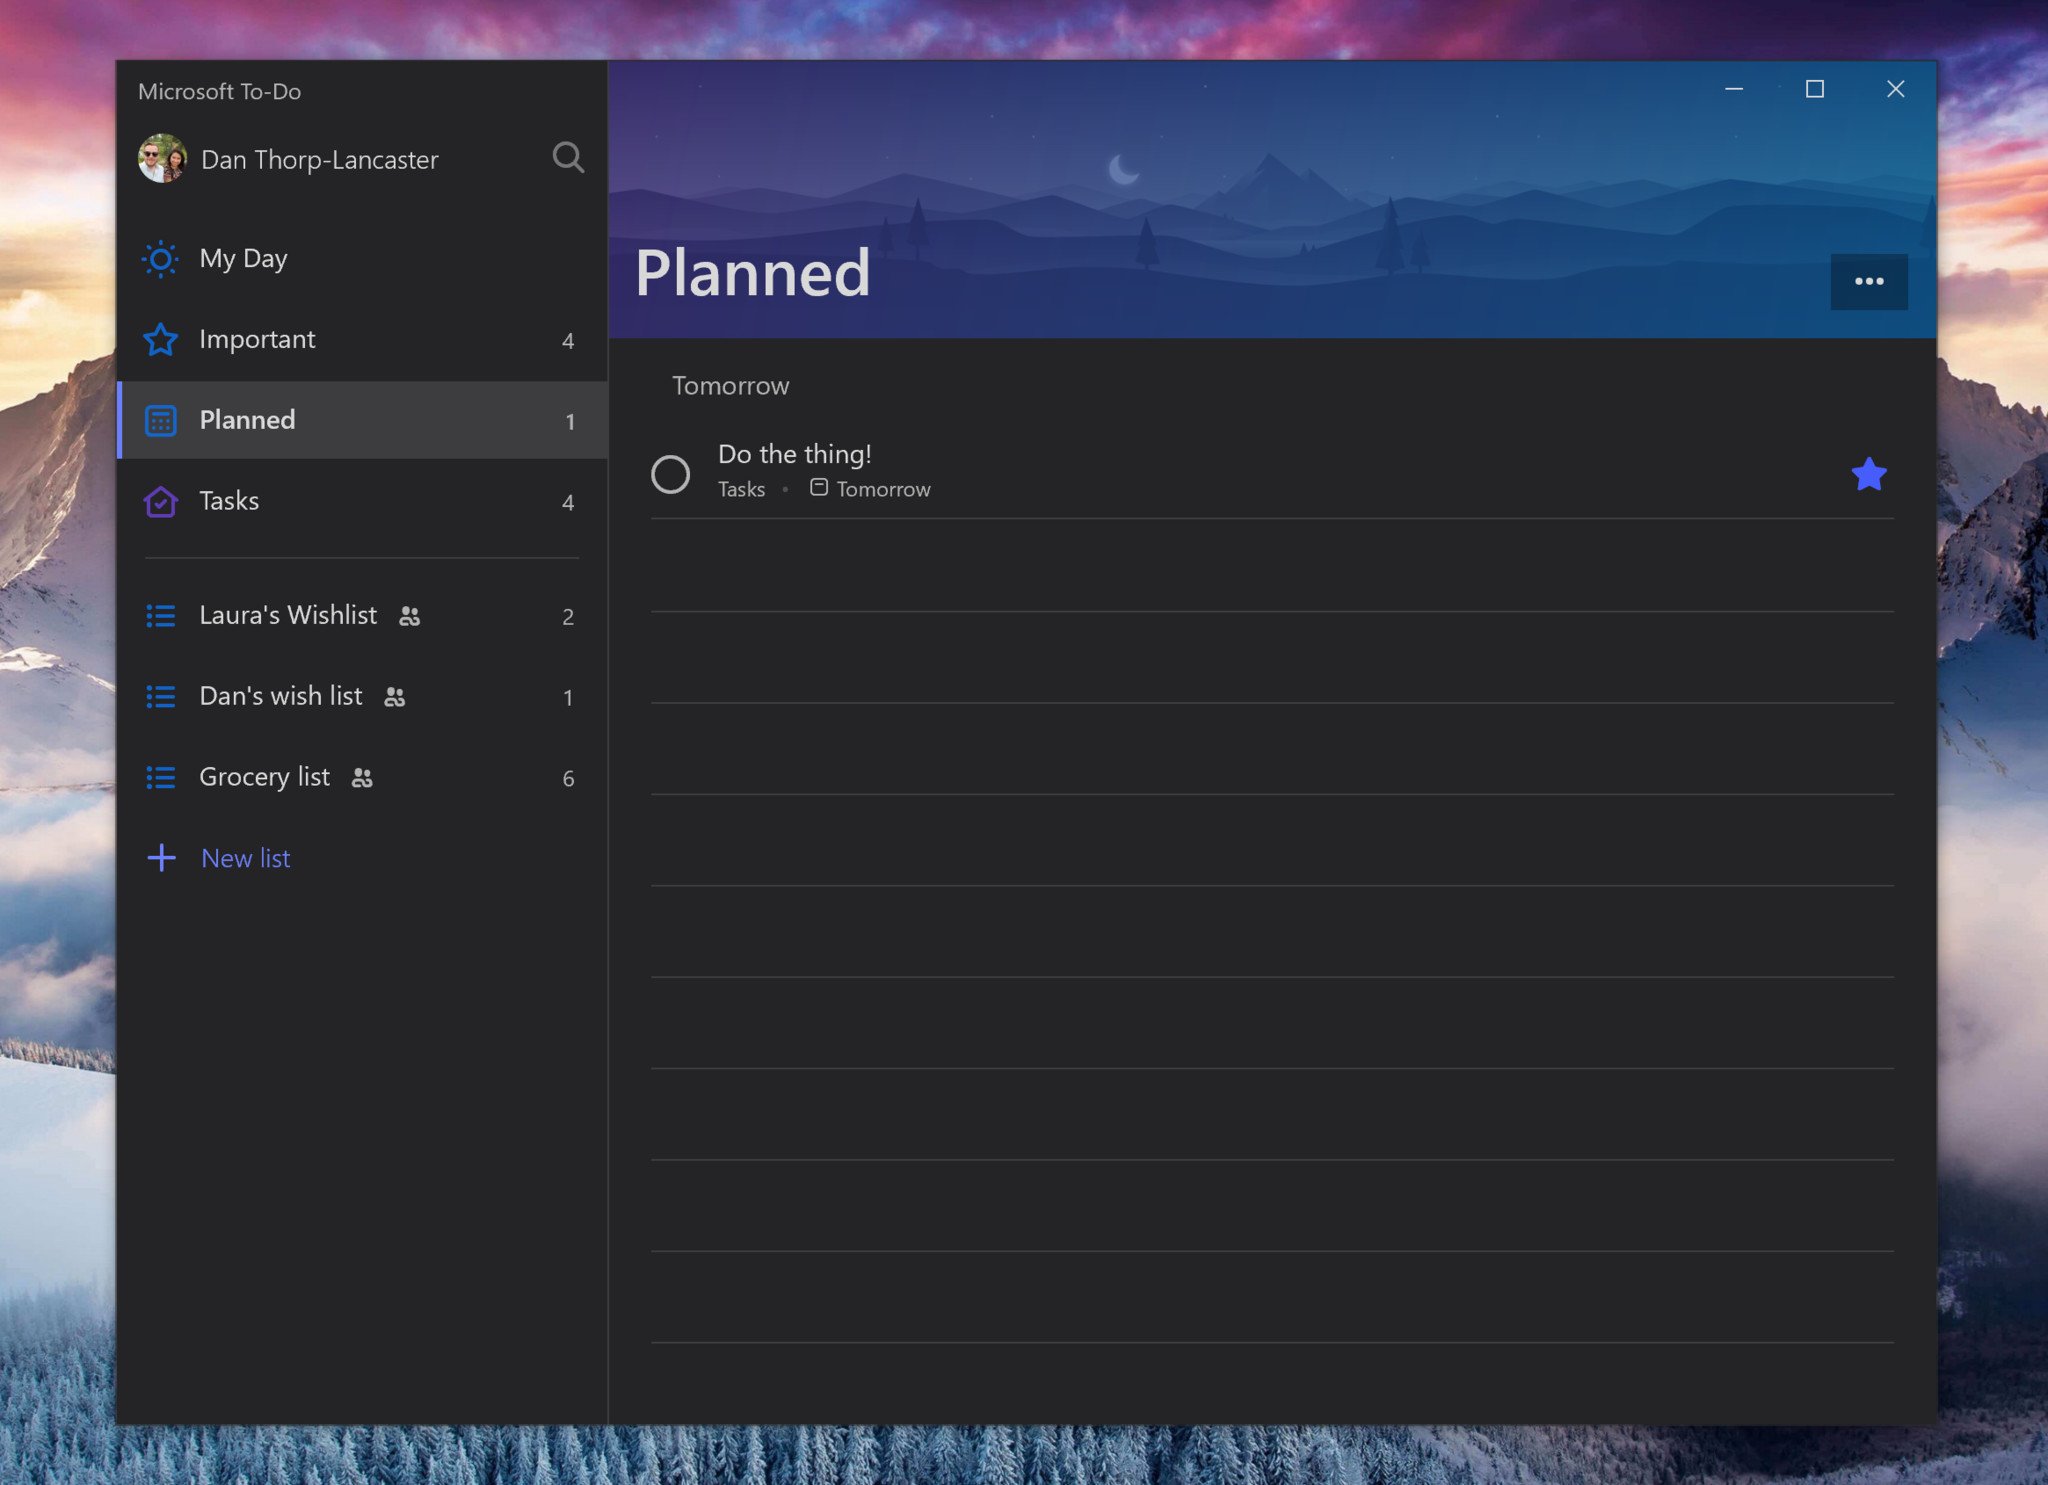 Microsoft To-Do rolls out 'Planned' smart list feature to Windows 10